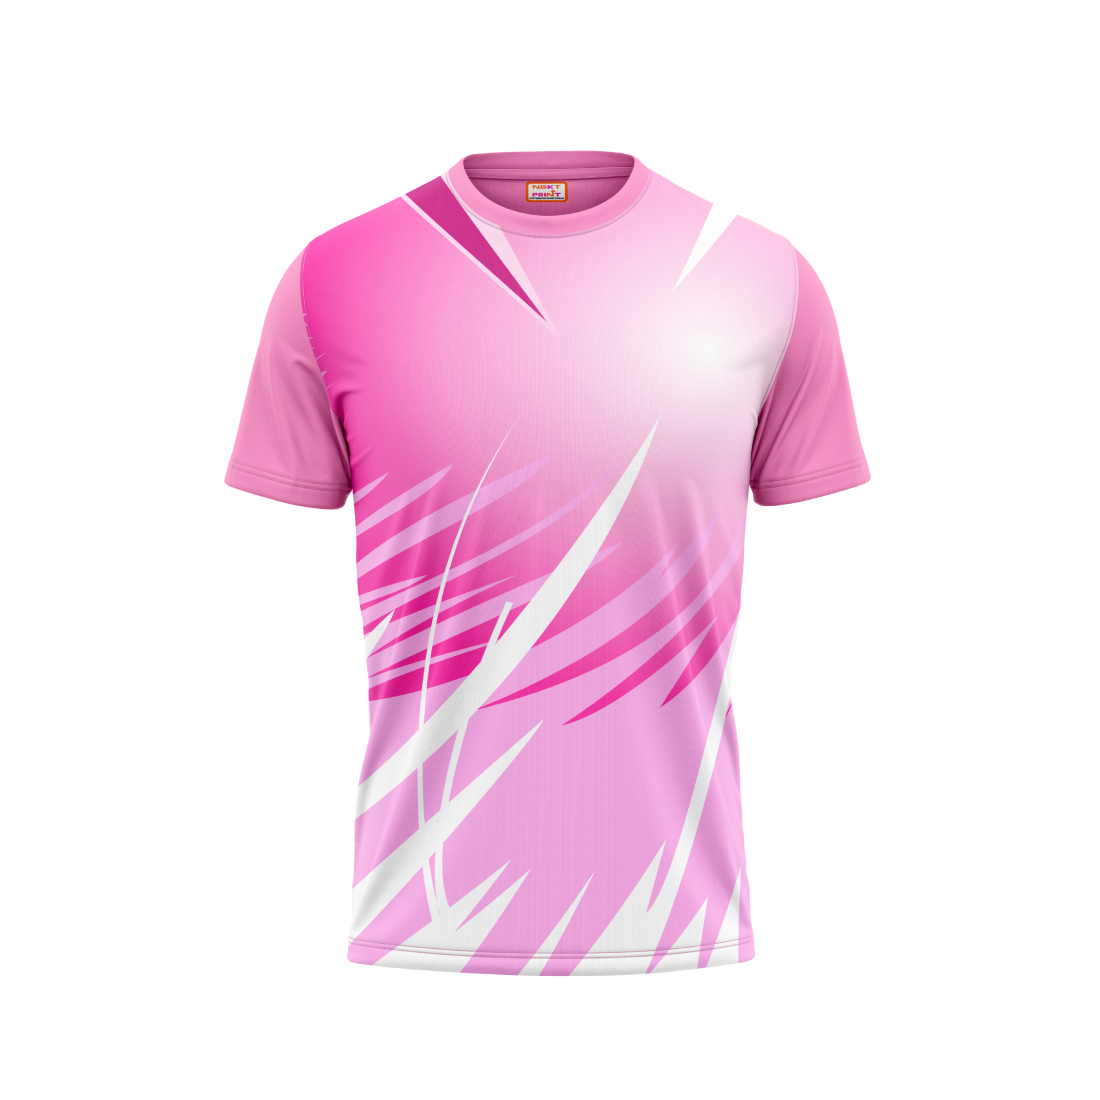 Copy of Round Neck Printed Jersey Pink NP00199